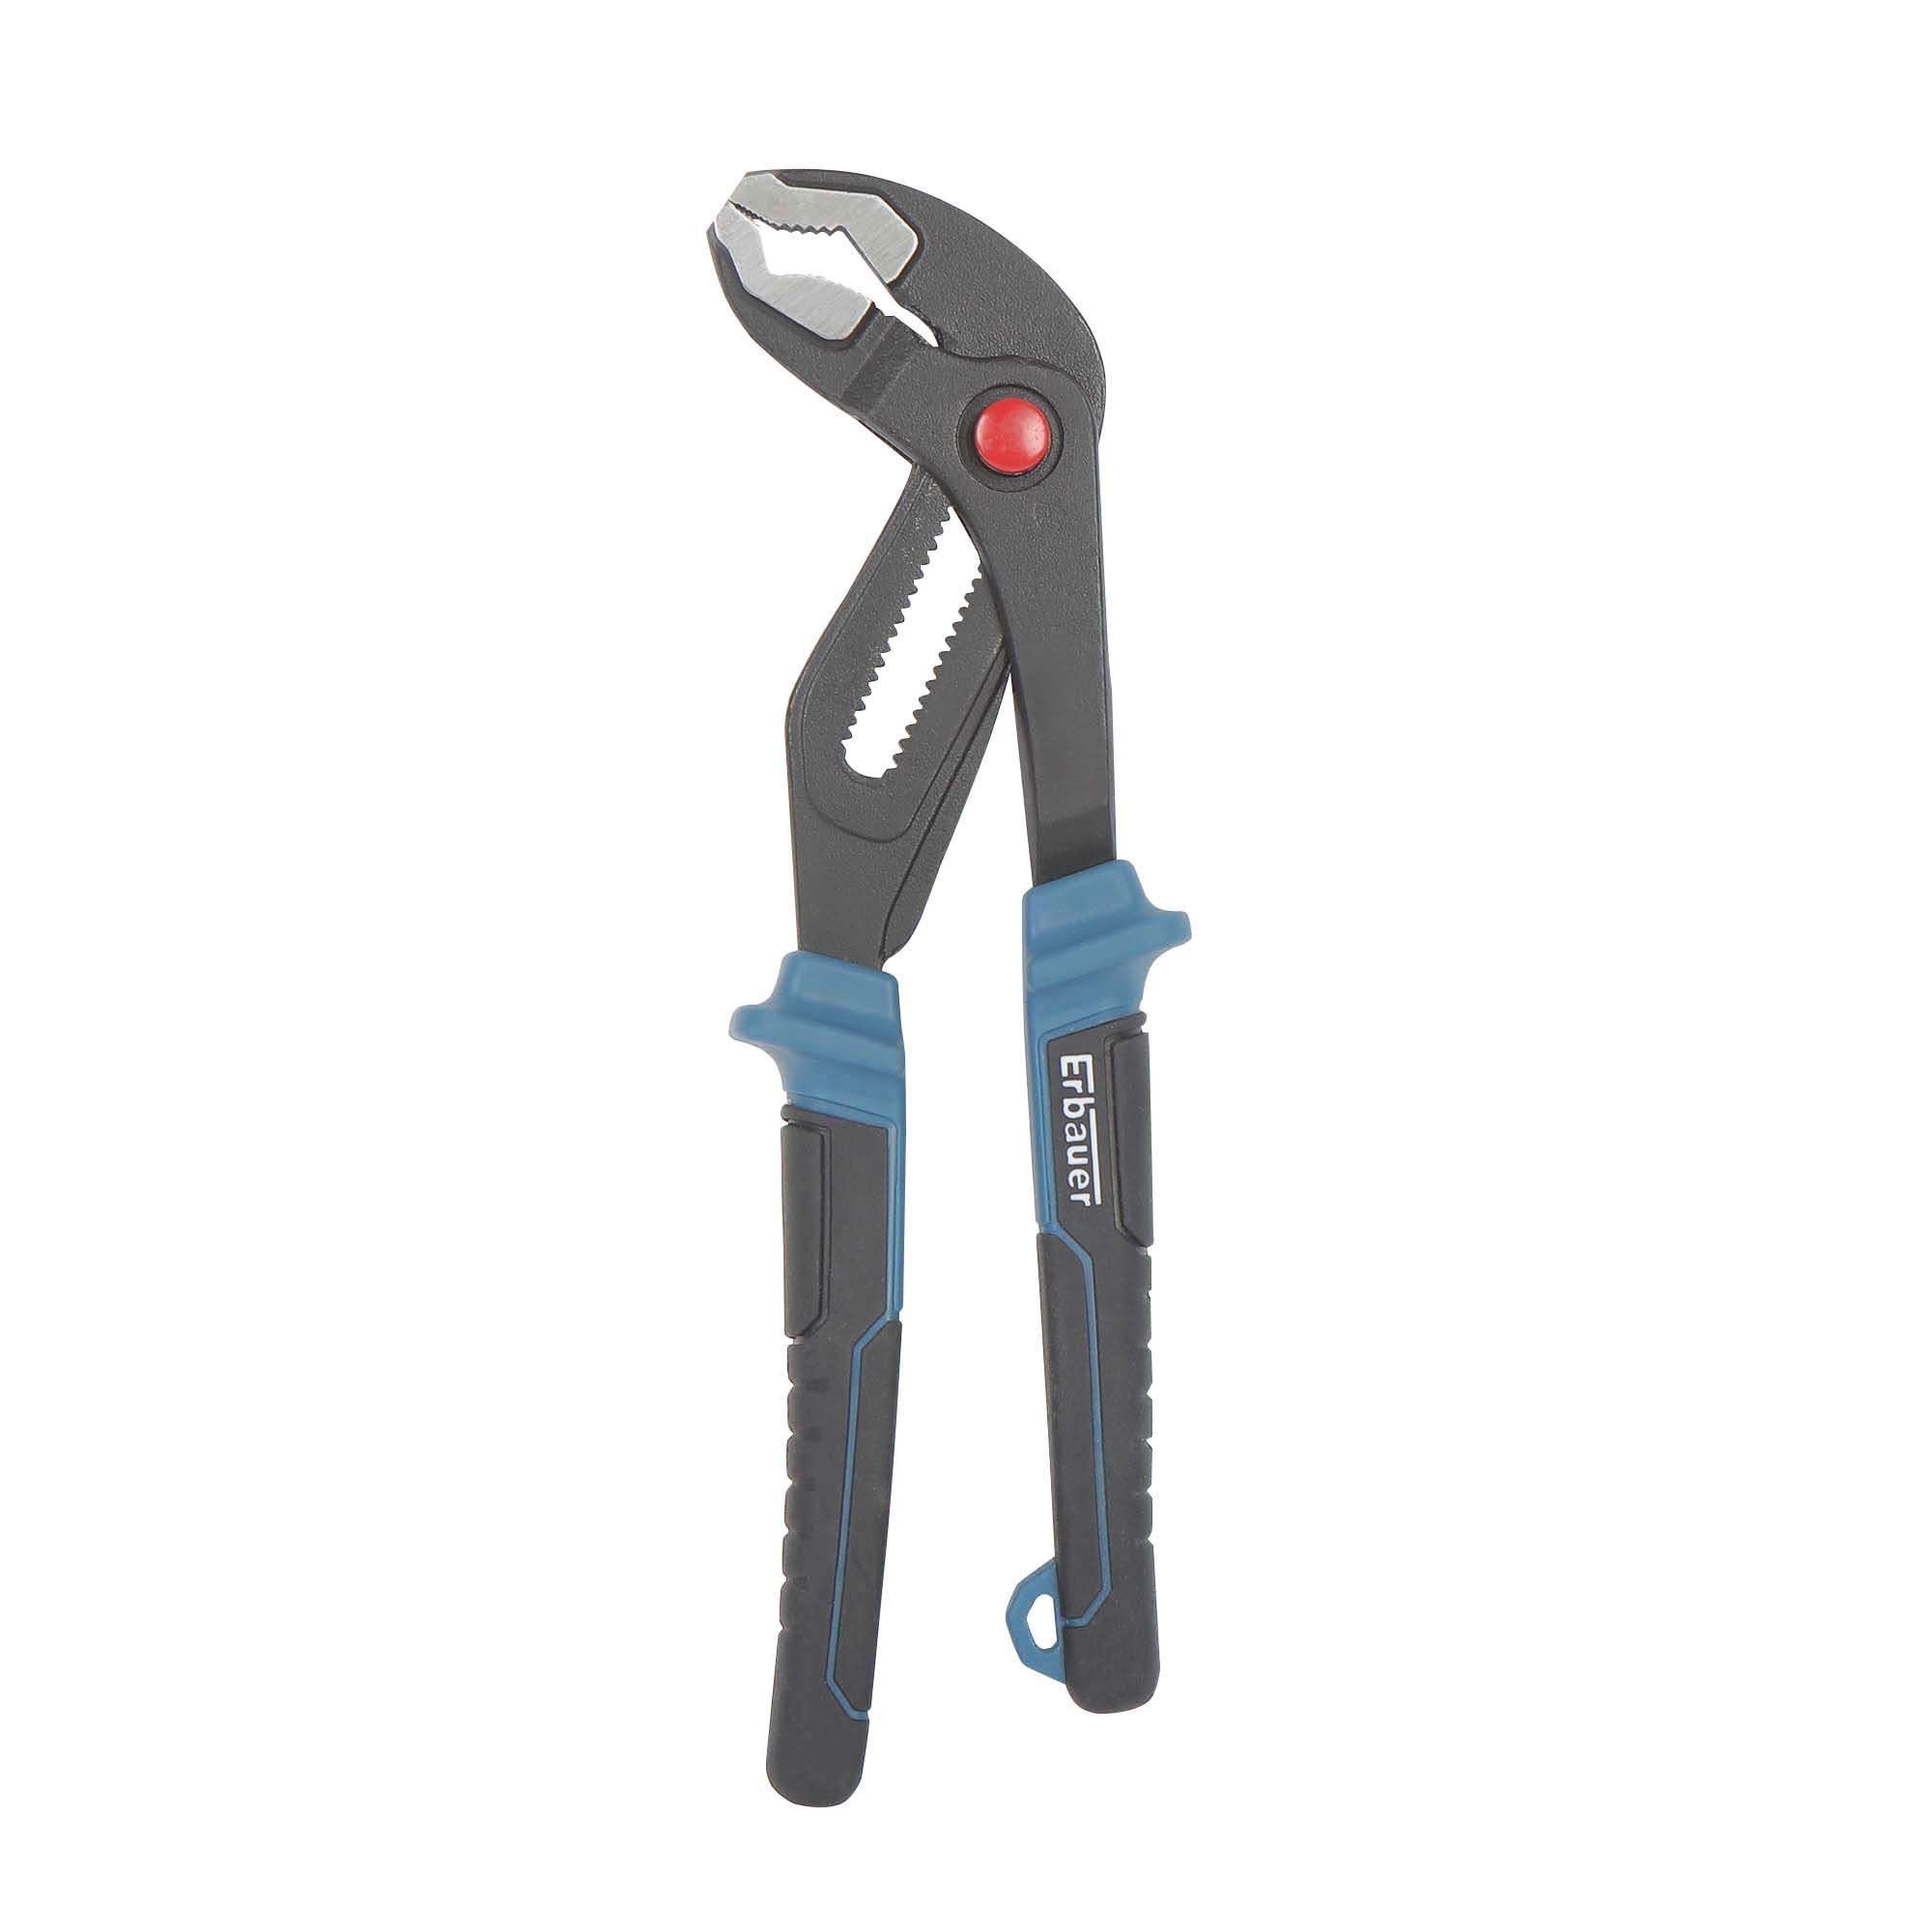 Erbauer 256mm Slip joint pliers